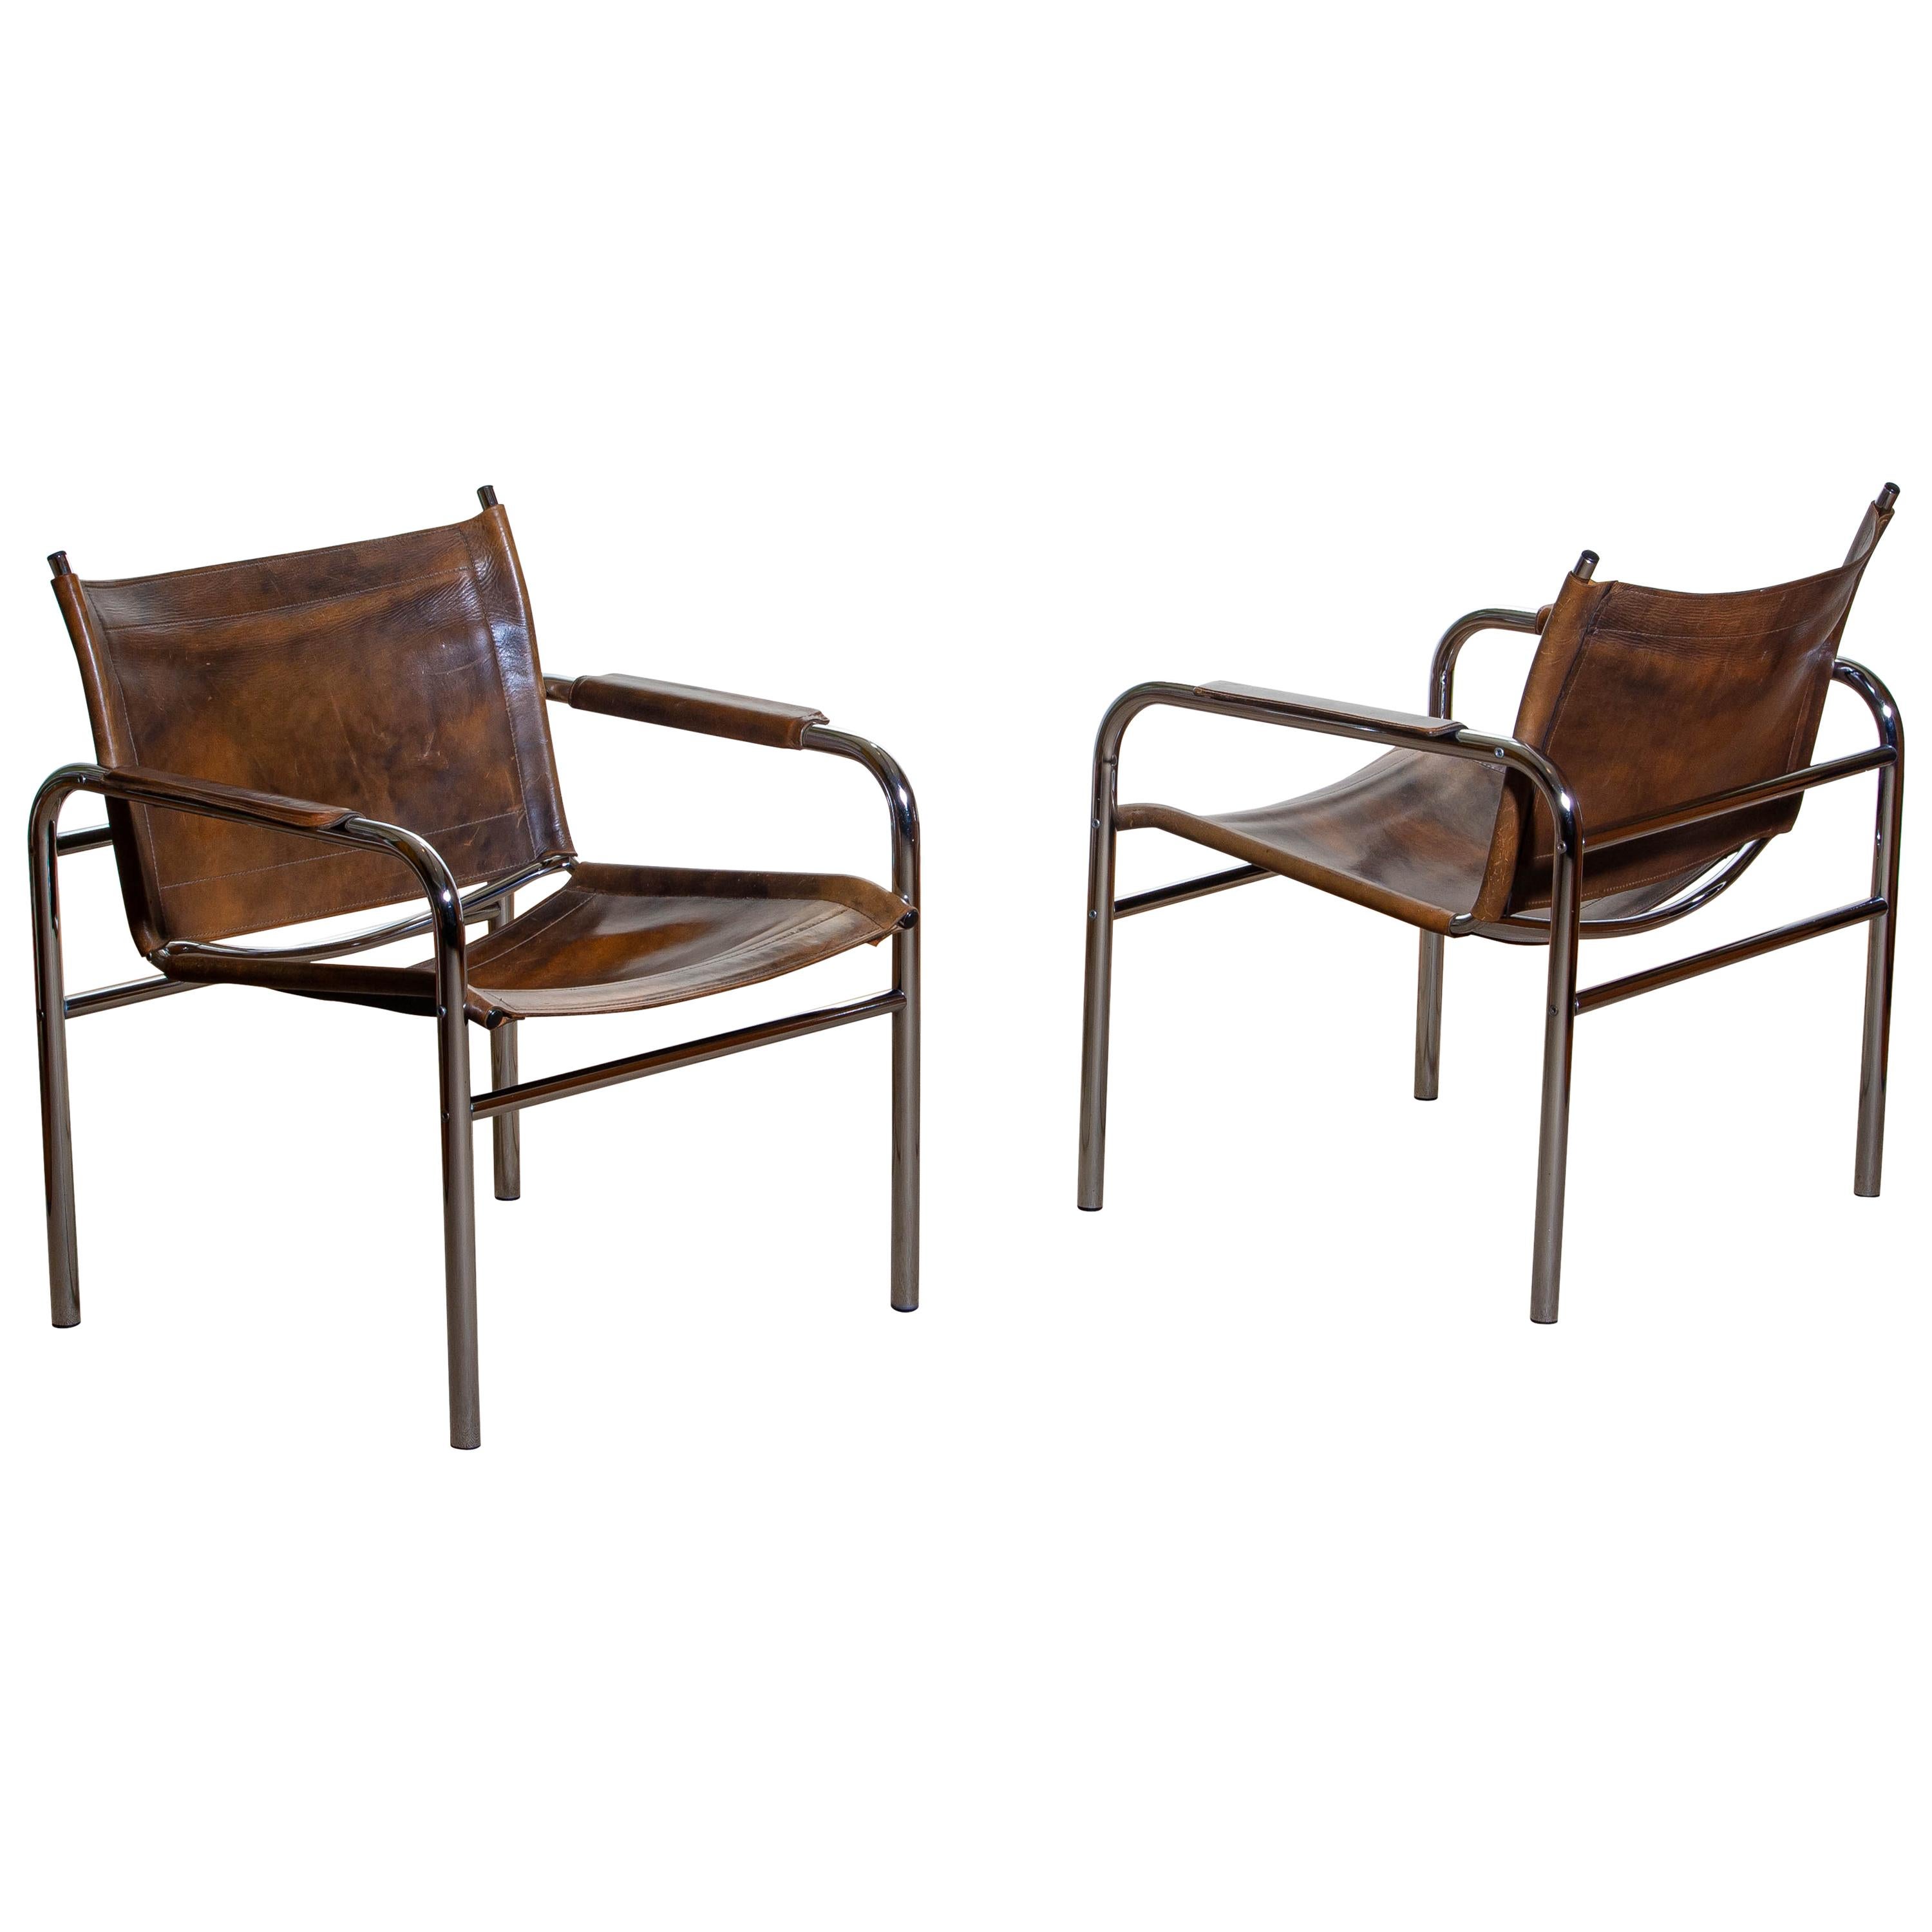 1980s, Pair of Leather and Tubular Steel Armchairs by Tord Bjorklund, Sweden 4